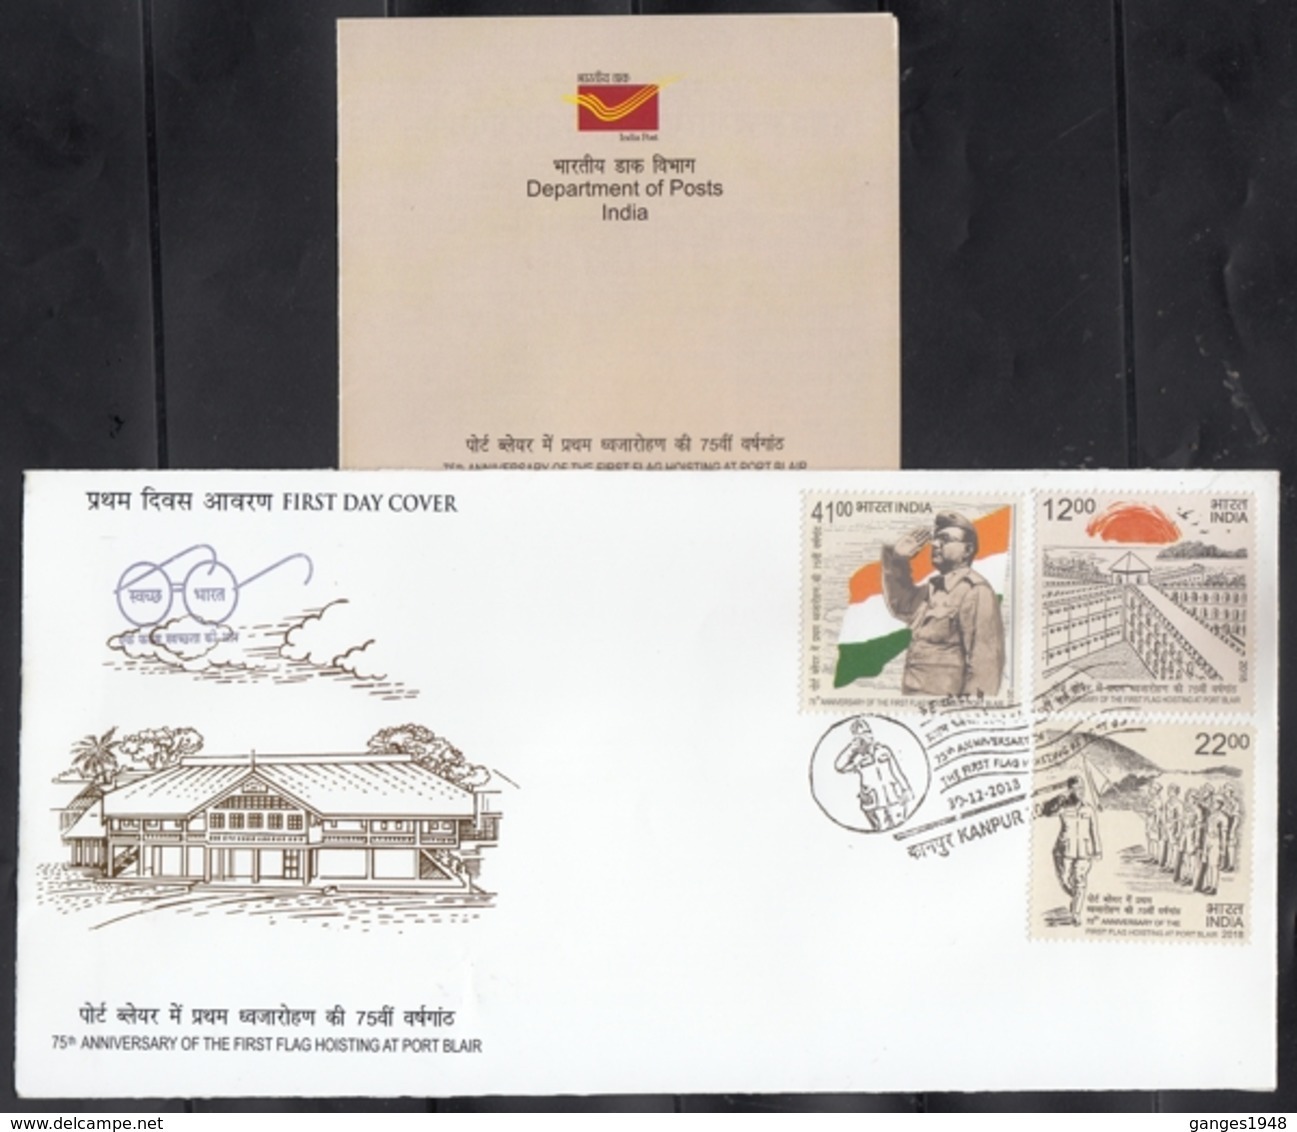 India  2018  Flag Hoisting By Netaji Subhash Chandra Bose  3v  Kanpur  First Day Cover  # 17495  D  Inde Indien - FDC